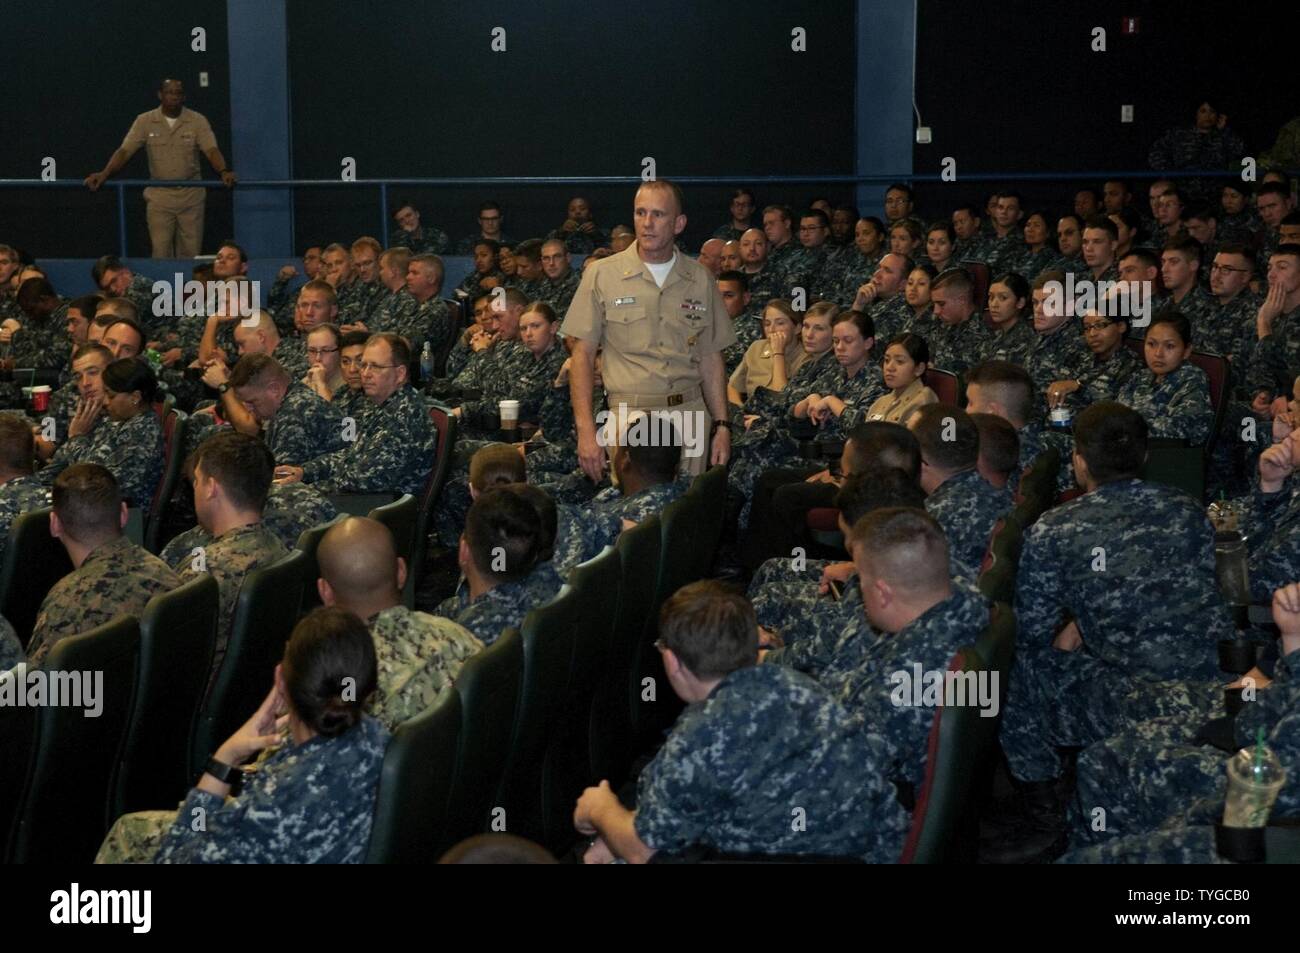 DIEGO (Nov. 8, 2016) The 14th Master Chief Petty Officer of the Navy (MCPON) Steven Giordano speaks with Sailors during an all-hands call at Naval Base San Diego. MCPON addressed current issues in the Navy and participated in a question-and-answer session with Sailors. This is Giordano's first visit to Naval Base San Diego since taking office as the 14th MCPON. Stock Photo